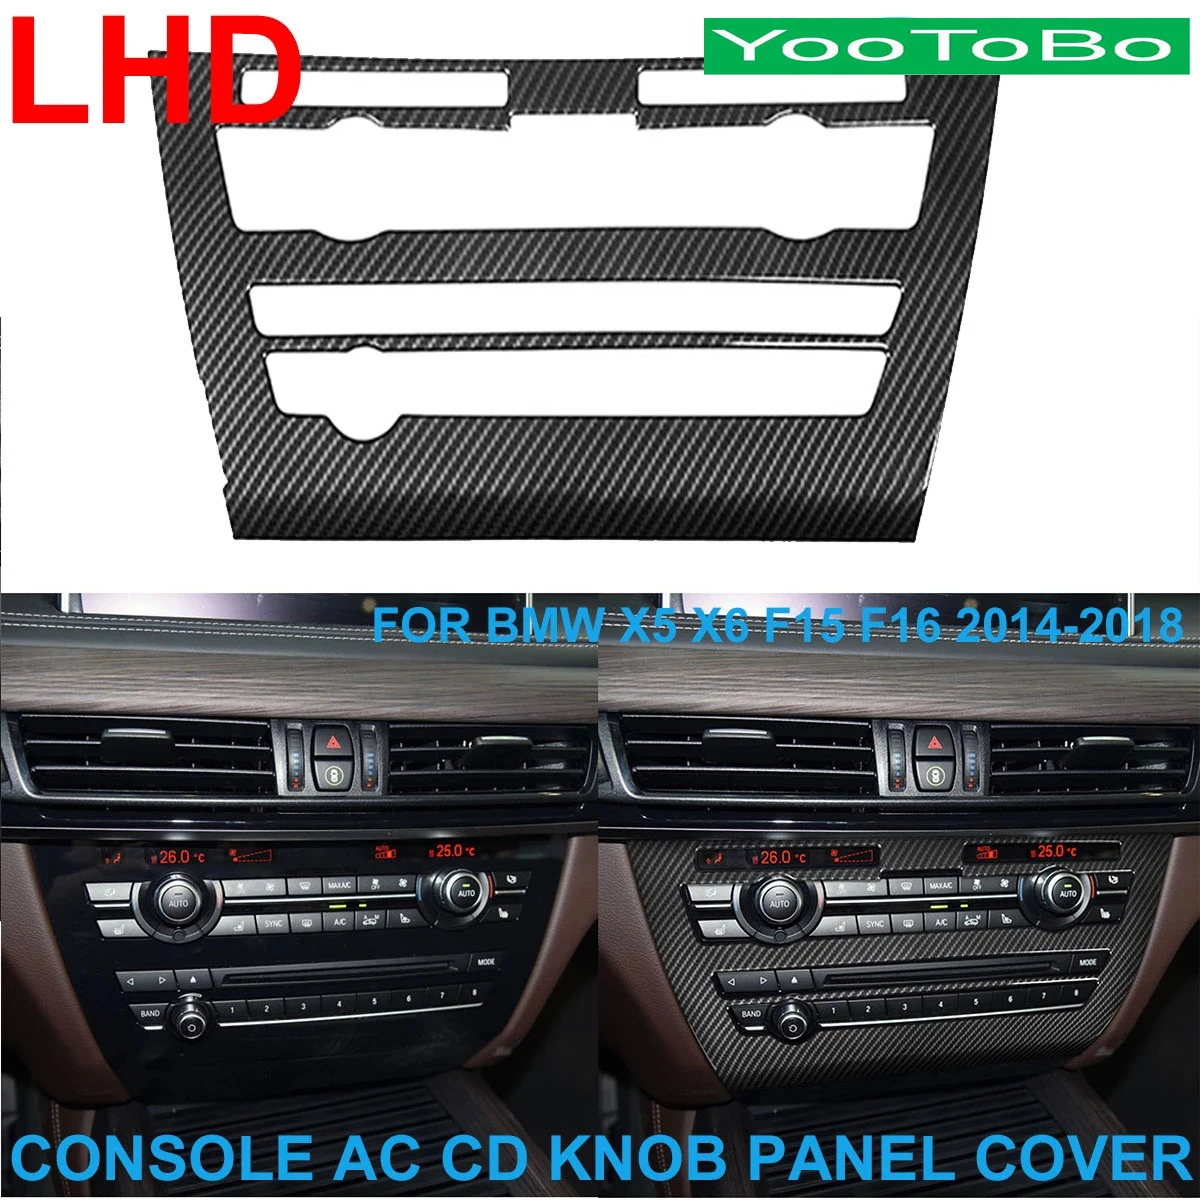 

LHD Car Styling Real Carbon Fiber Console AC Air Conditioner CD Player Knob Cover Panel Trim For BMW X5 X6 F15 F16 2014-2018